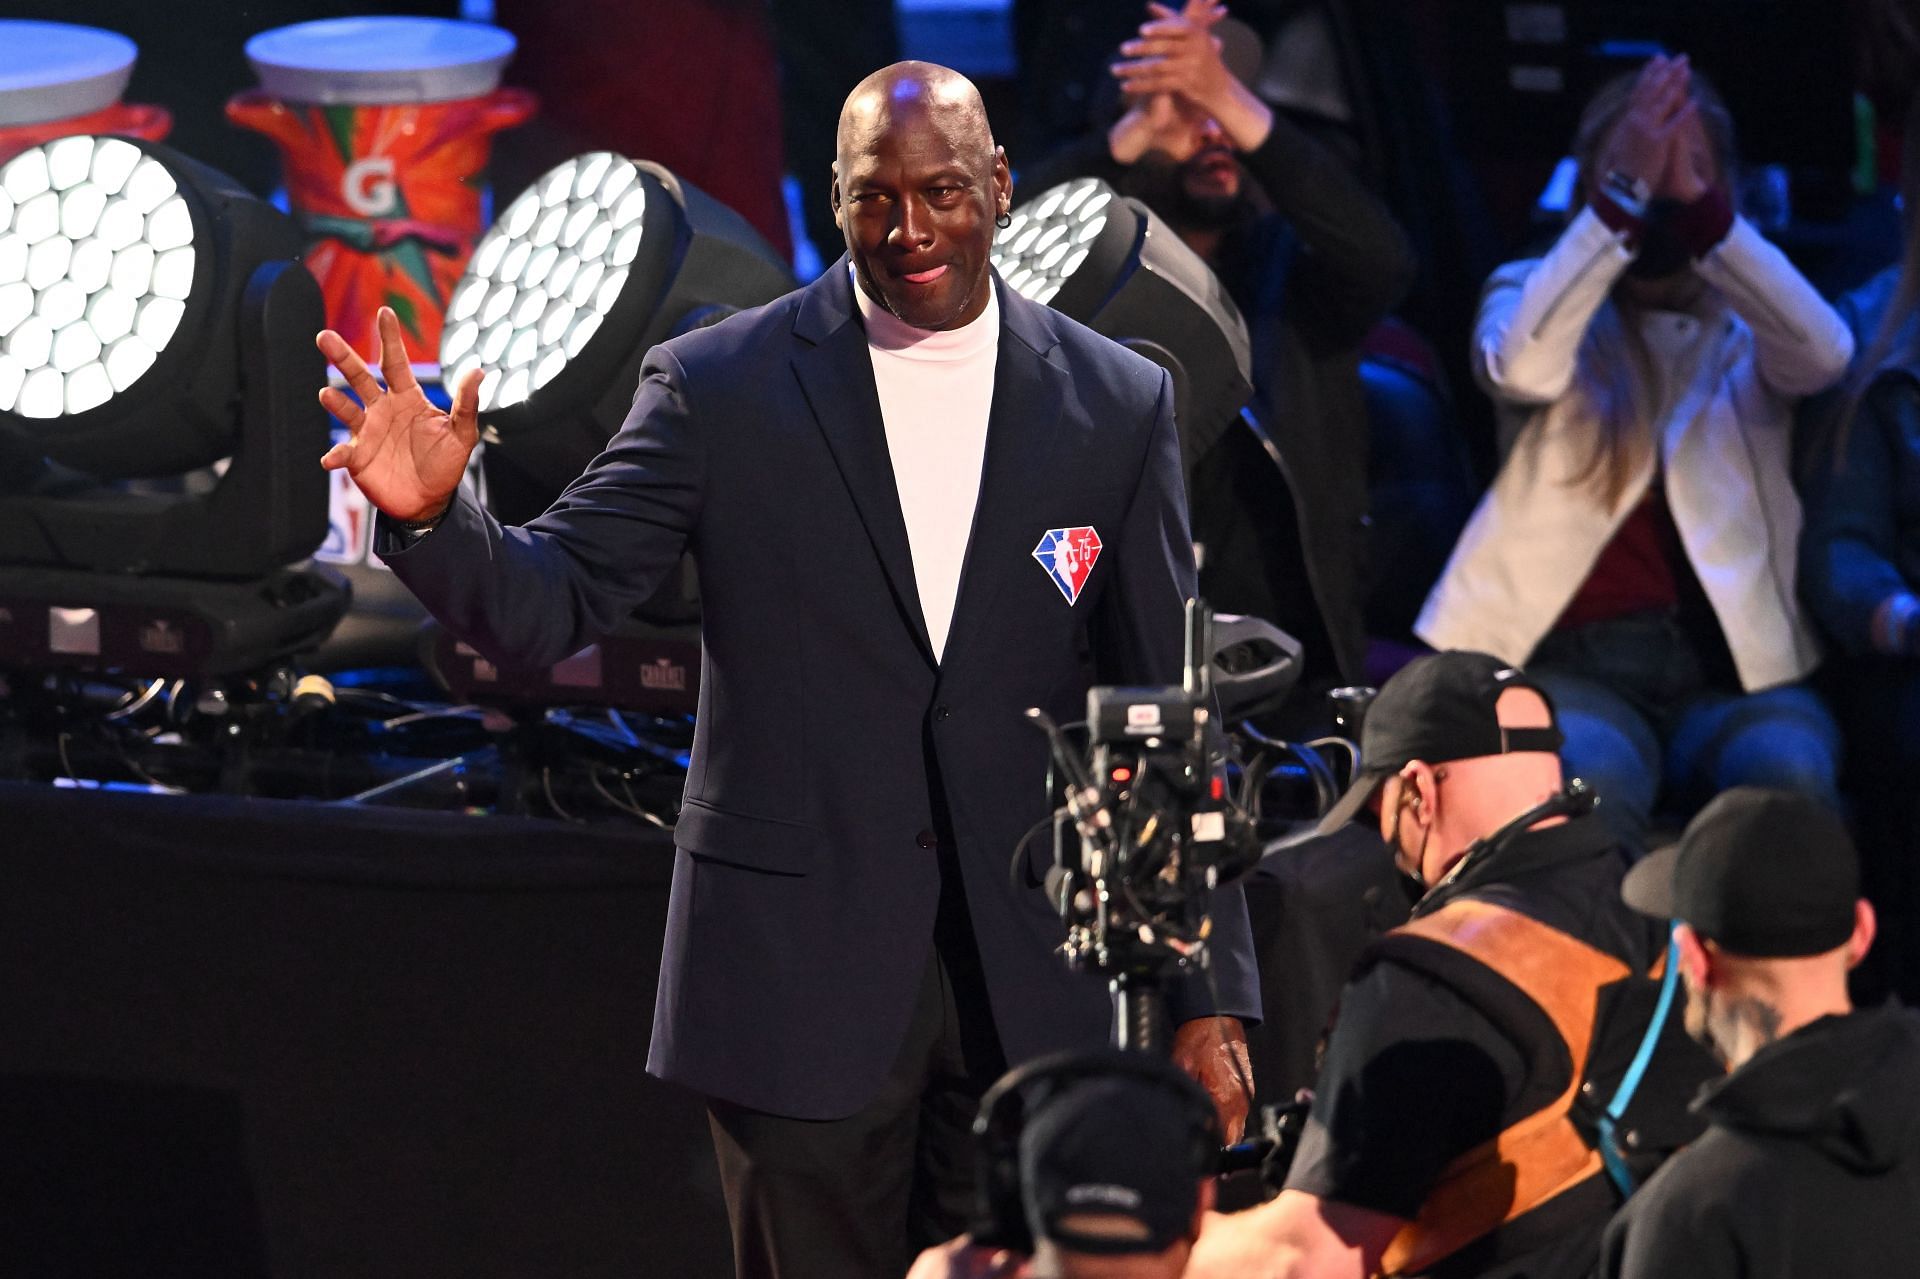 Michael Jordan reacts after being introduced as part of the NBA 75th Anniversary Team during the 2022 NBA All-Star Game at Rocket Mortgage Fieldhouse on February 20, 2022 in Cleveland, Ohio.